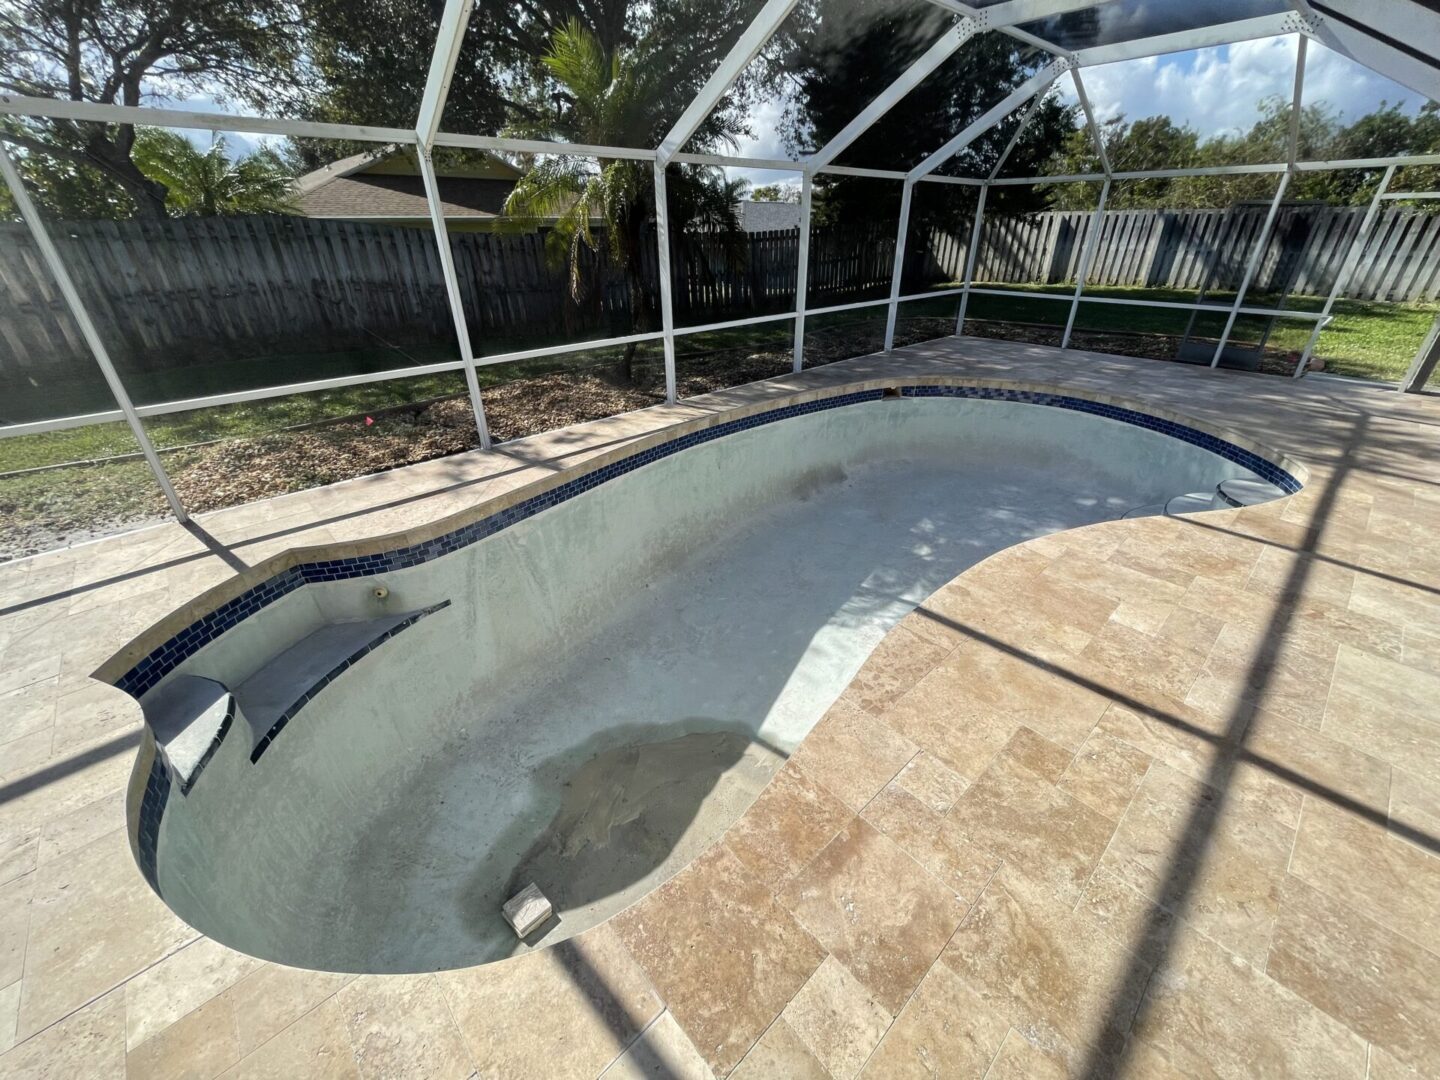 A drained outdoor pool enclosed by a screened fence, with some visible debris at the bottom; surrounded by a stone tile deck. Trees and a wooden privacy fence are in the background.